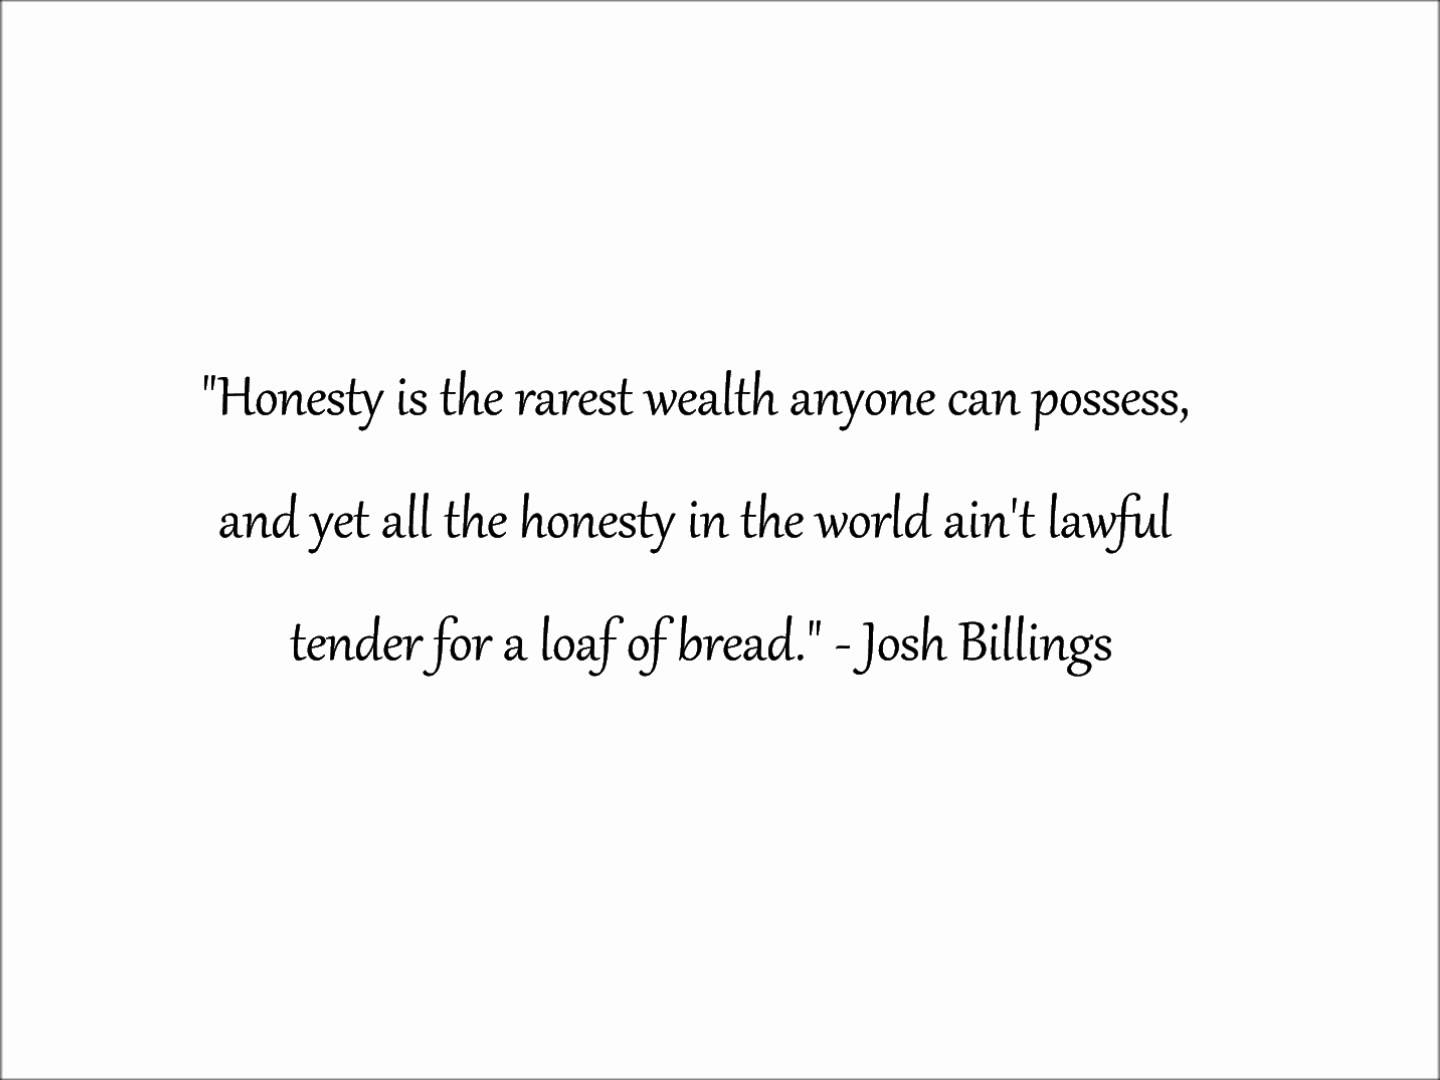 Honesty is the rarest wealth anyone can possess, and yet all the honesty in the world ain’t lawful tender for a loaf of bread.